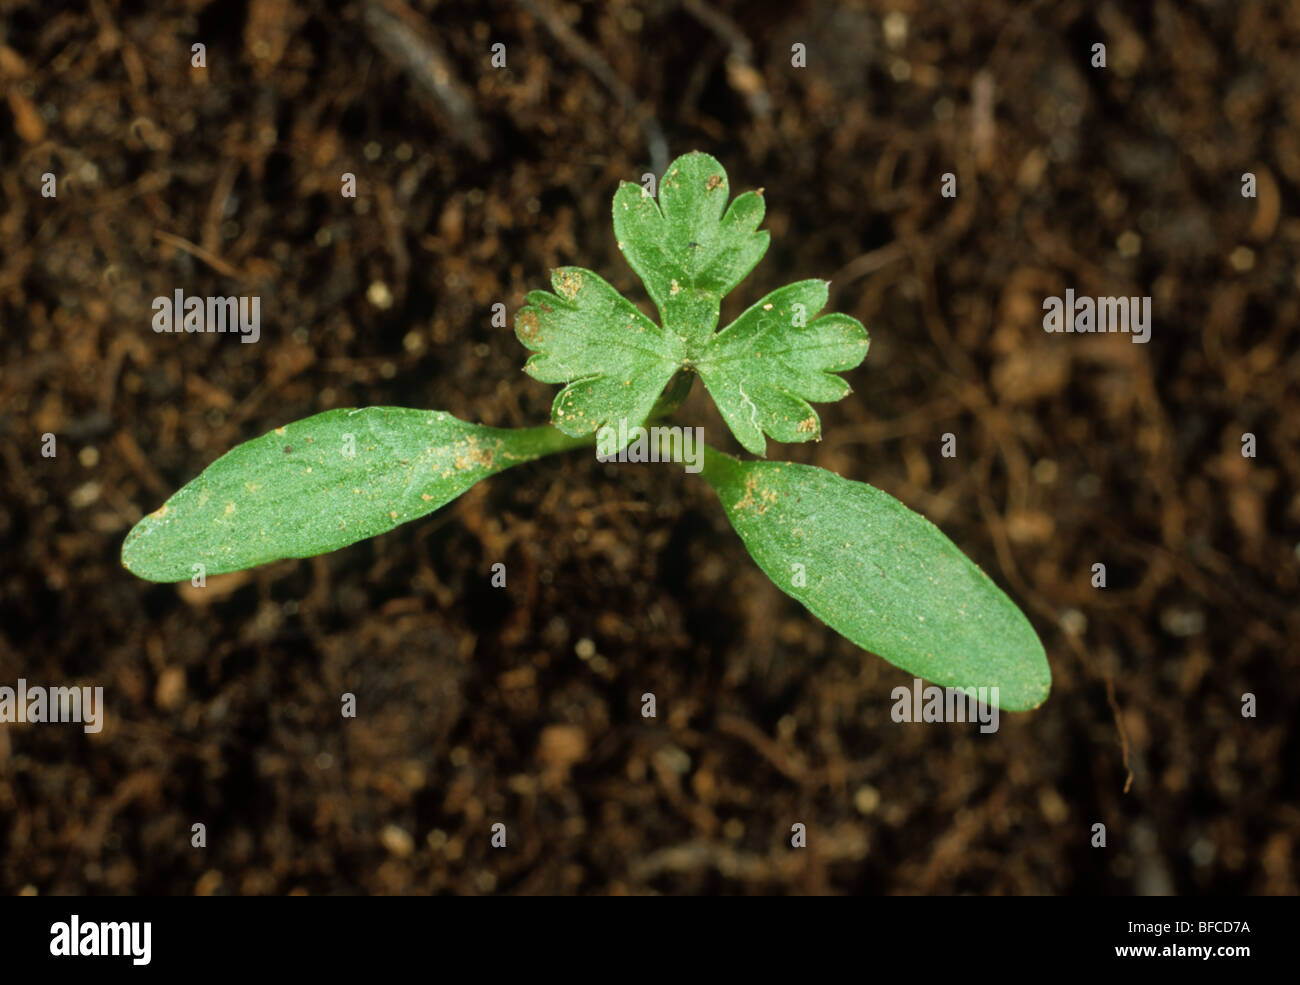 Fools parsley (Aethusa cynapium) seedling with first true leaf forming Stock Photo